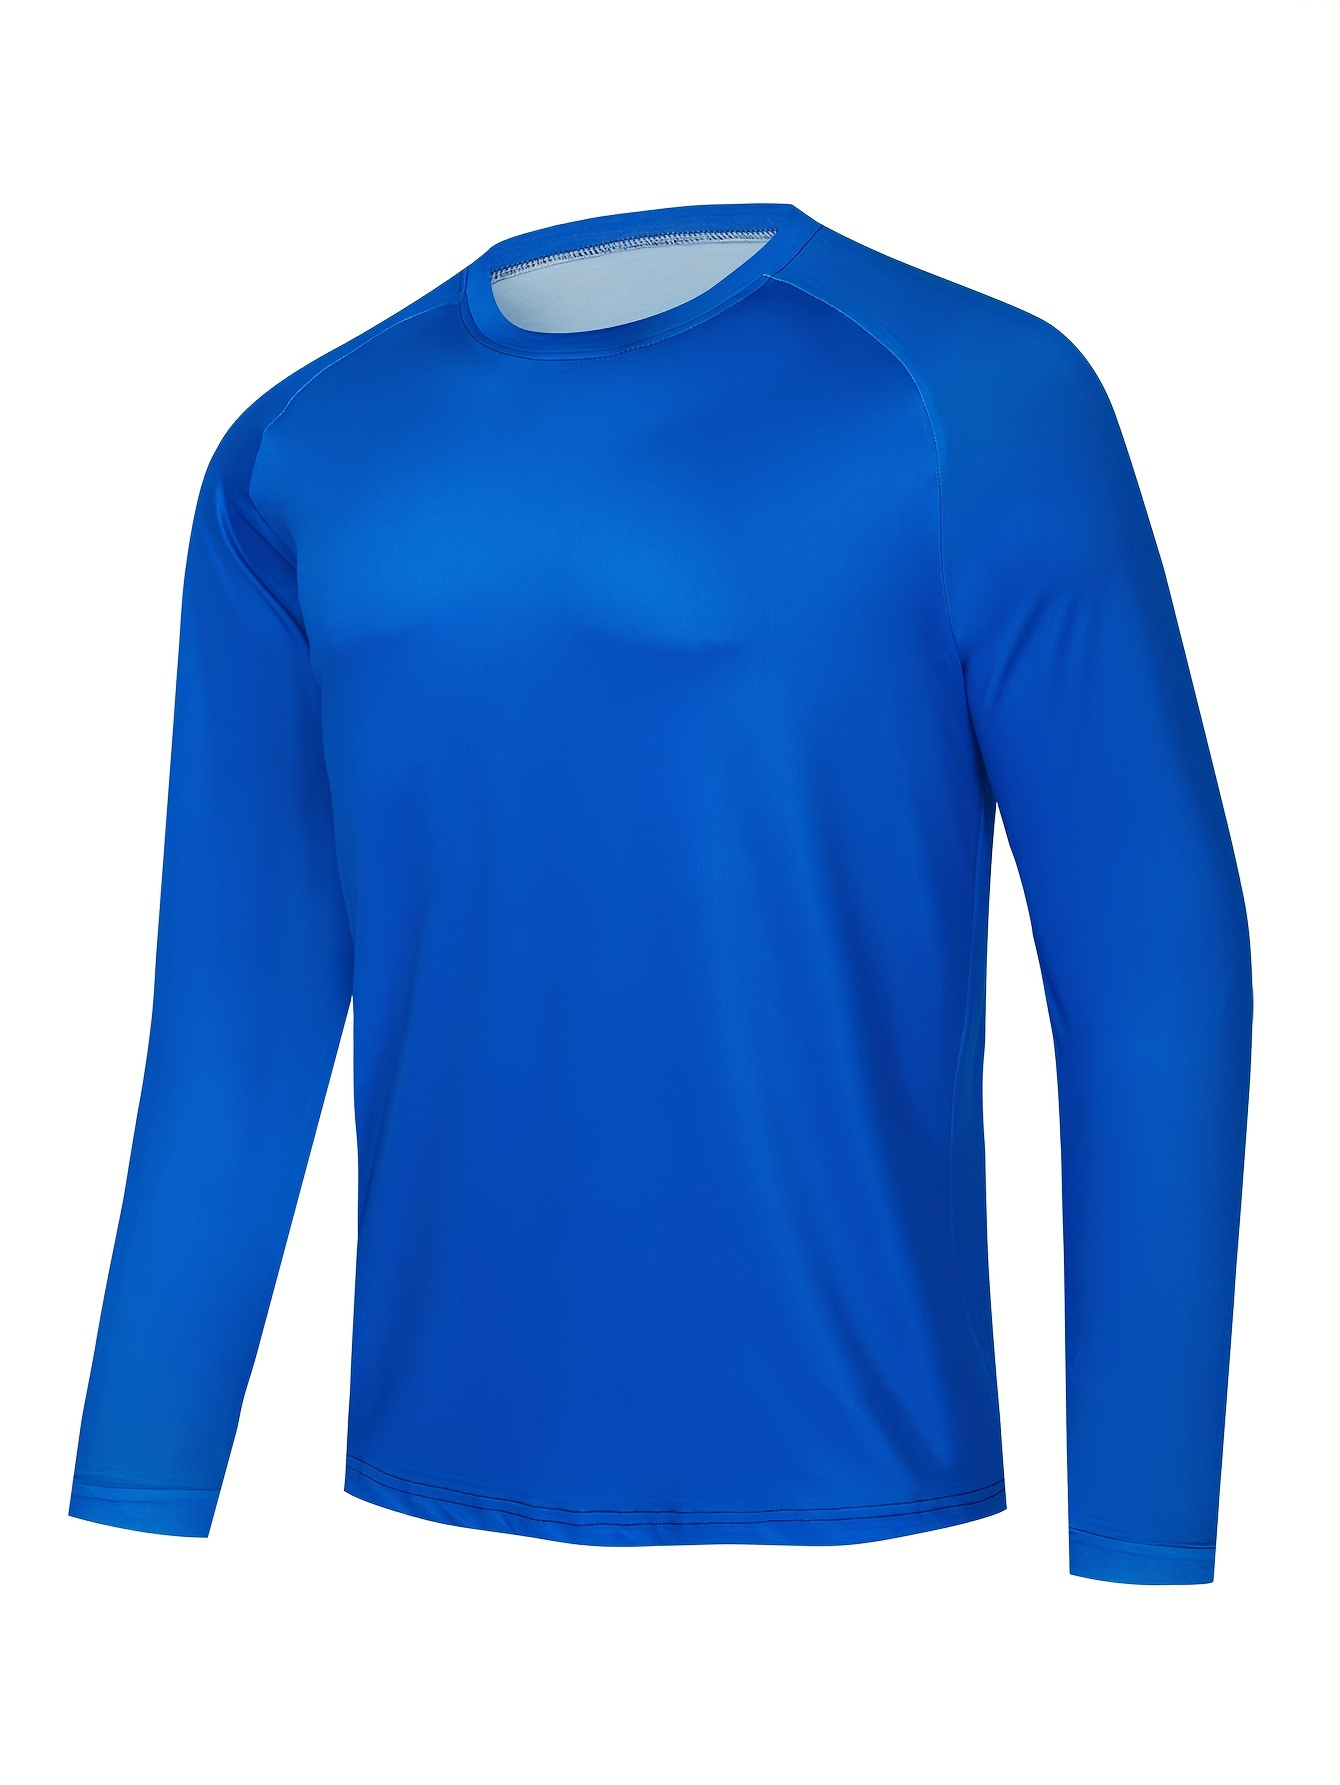 Men's Solid Color Long Sleeve T-Shirt, Anti-uv Sunscreen Sun Protection Fishing Shirt Breathable Quick Dry Fishing Jersey For Trekking Running